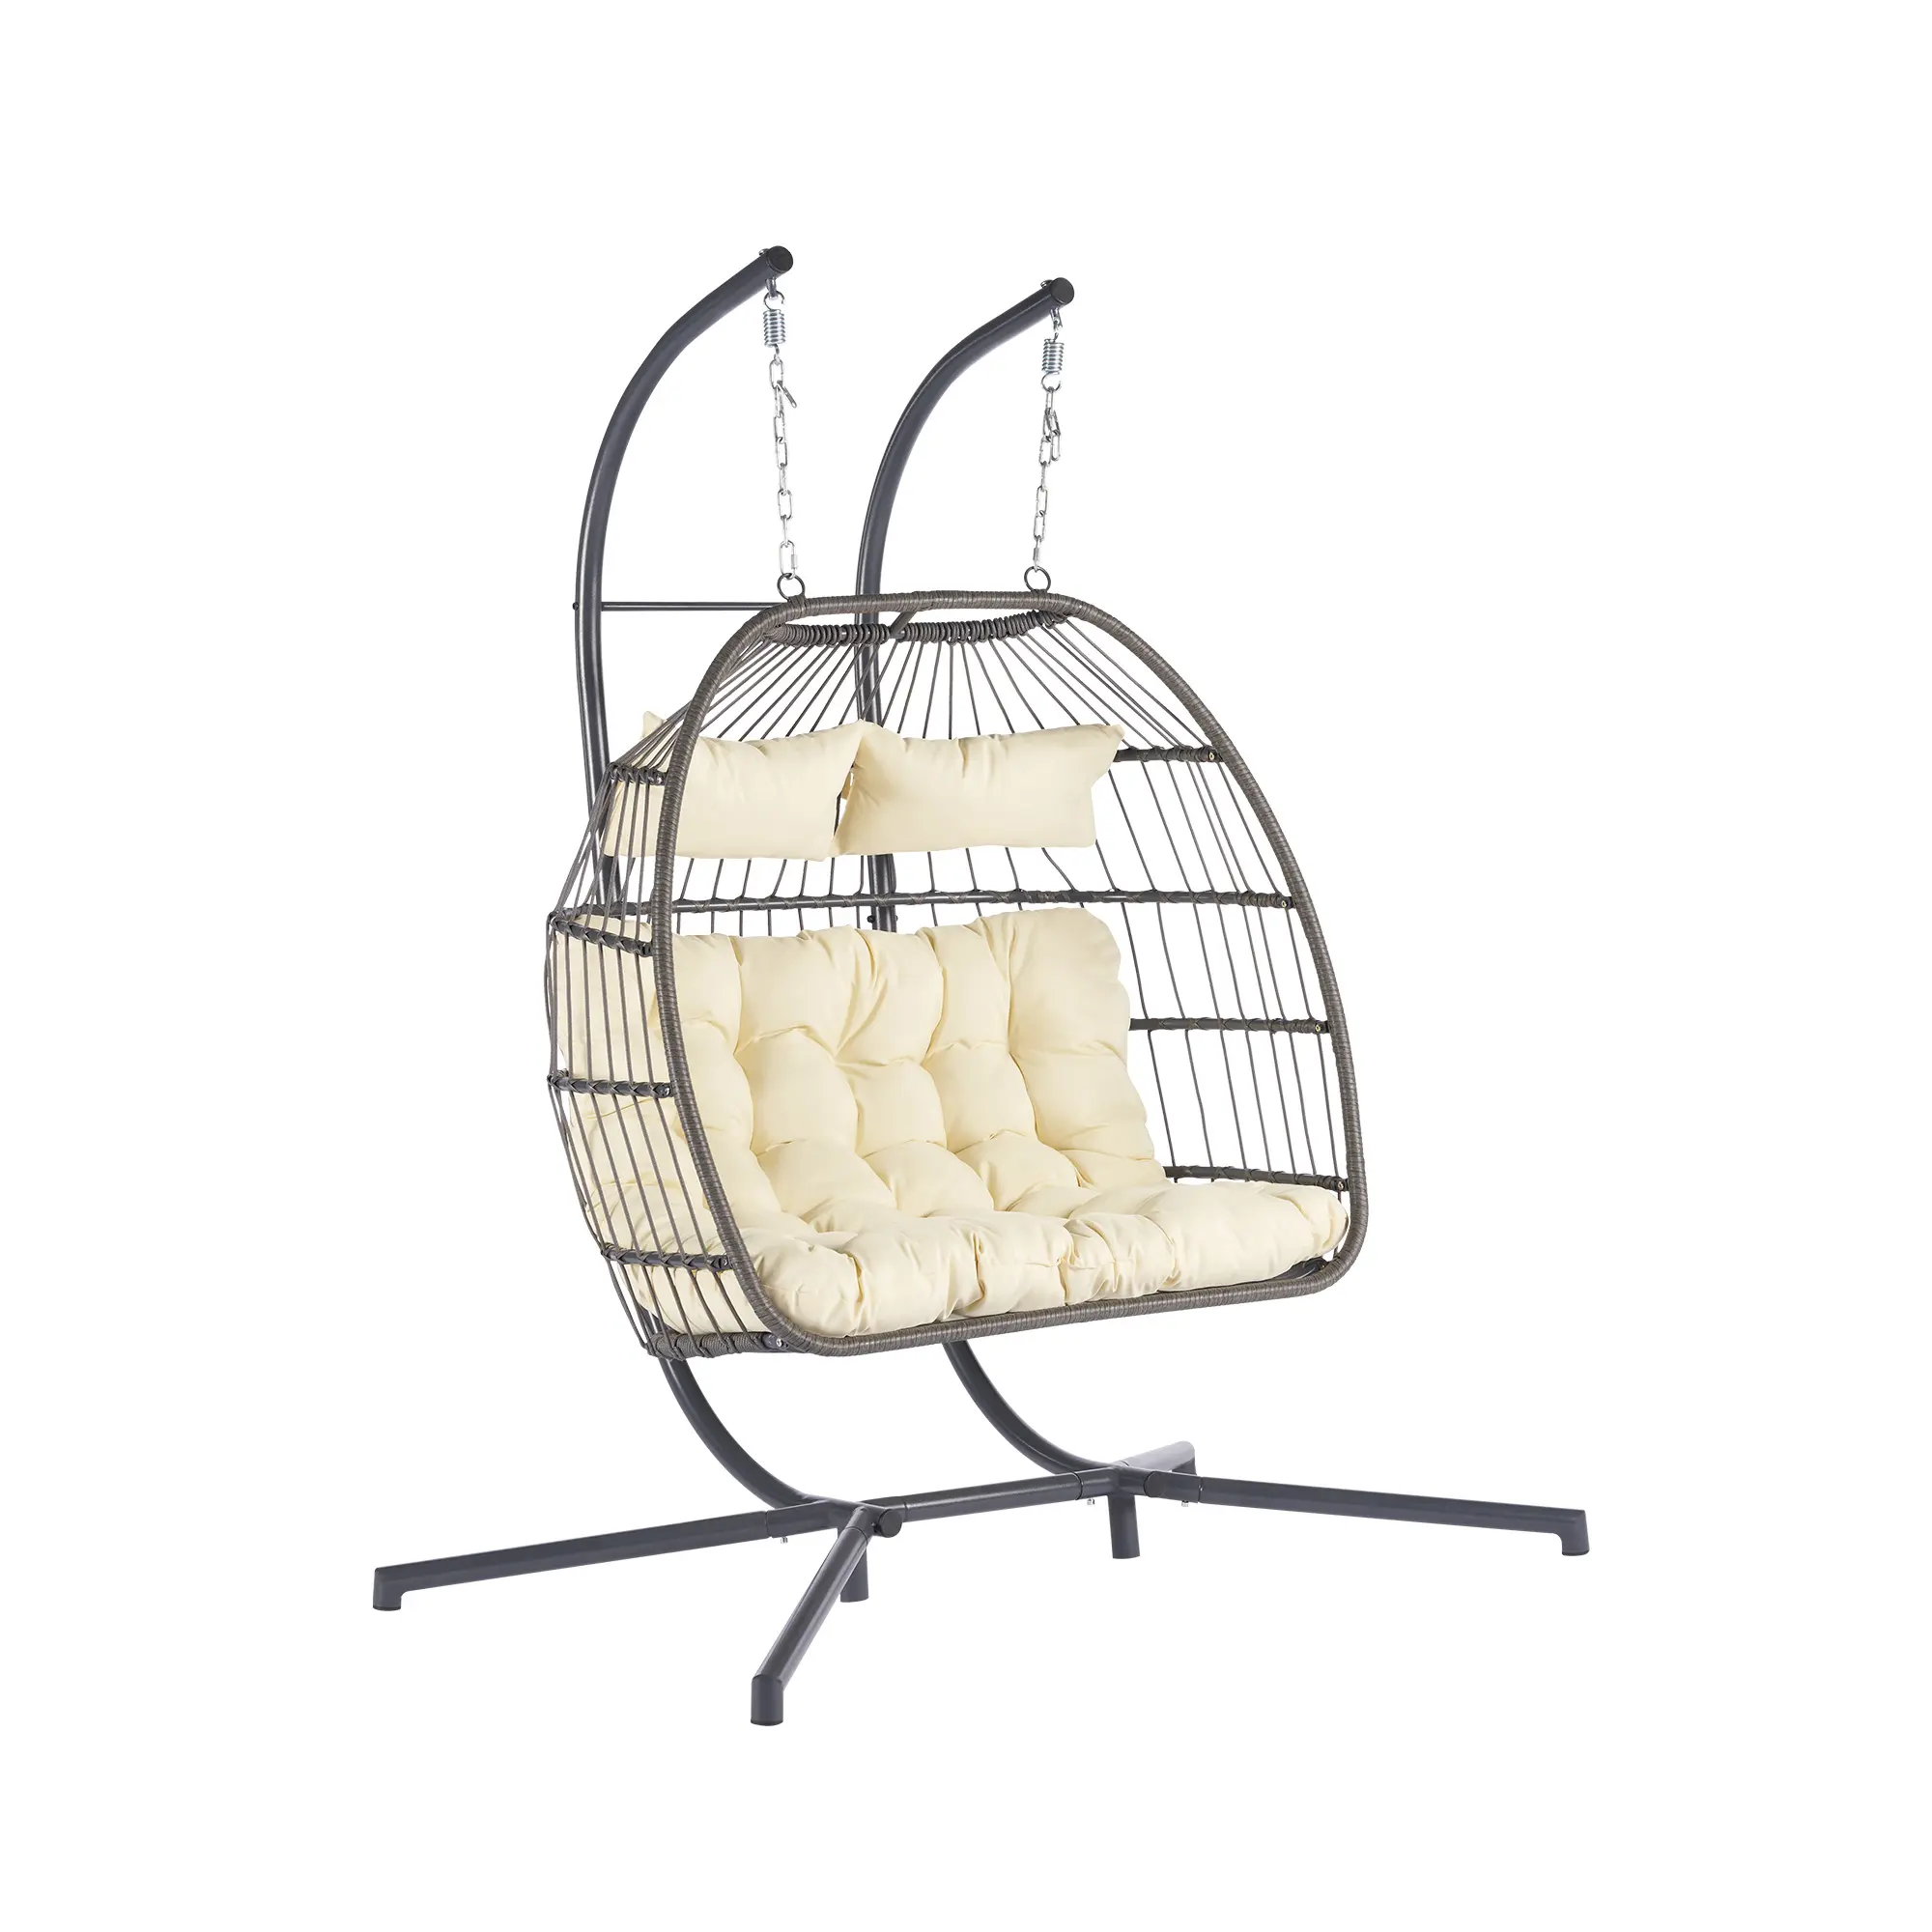 2-Person Wicker Patio Swing Chair Folding Hanging Egg Chair with Beige Cushions